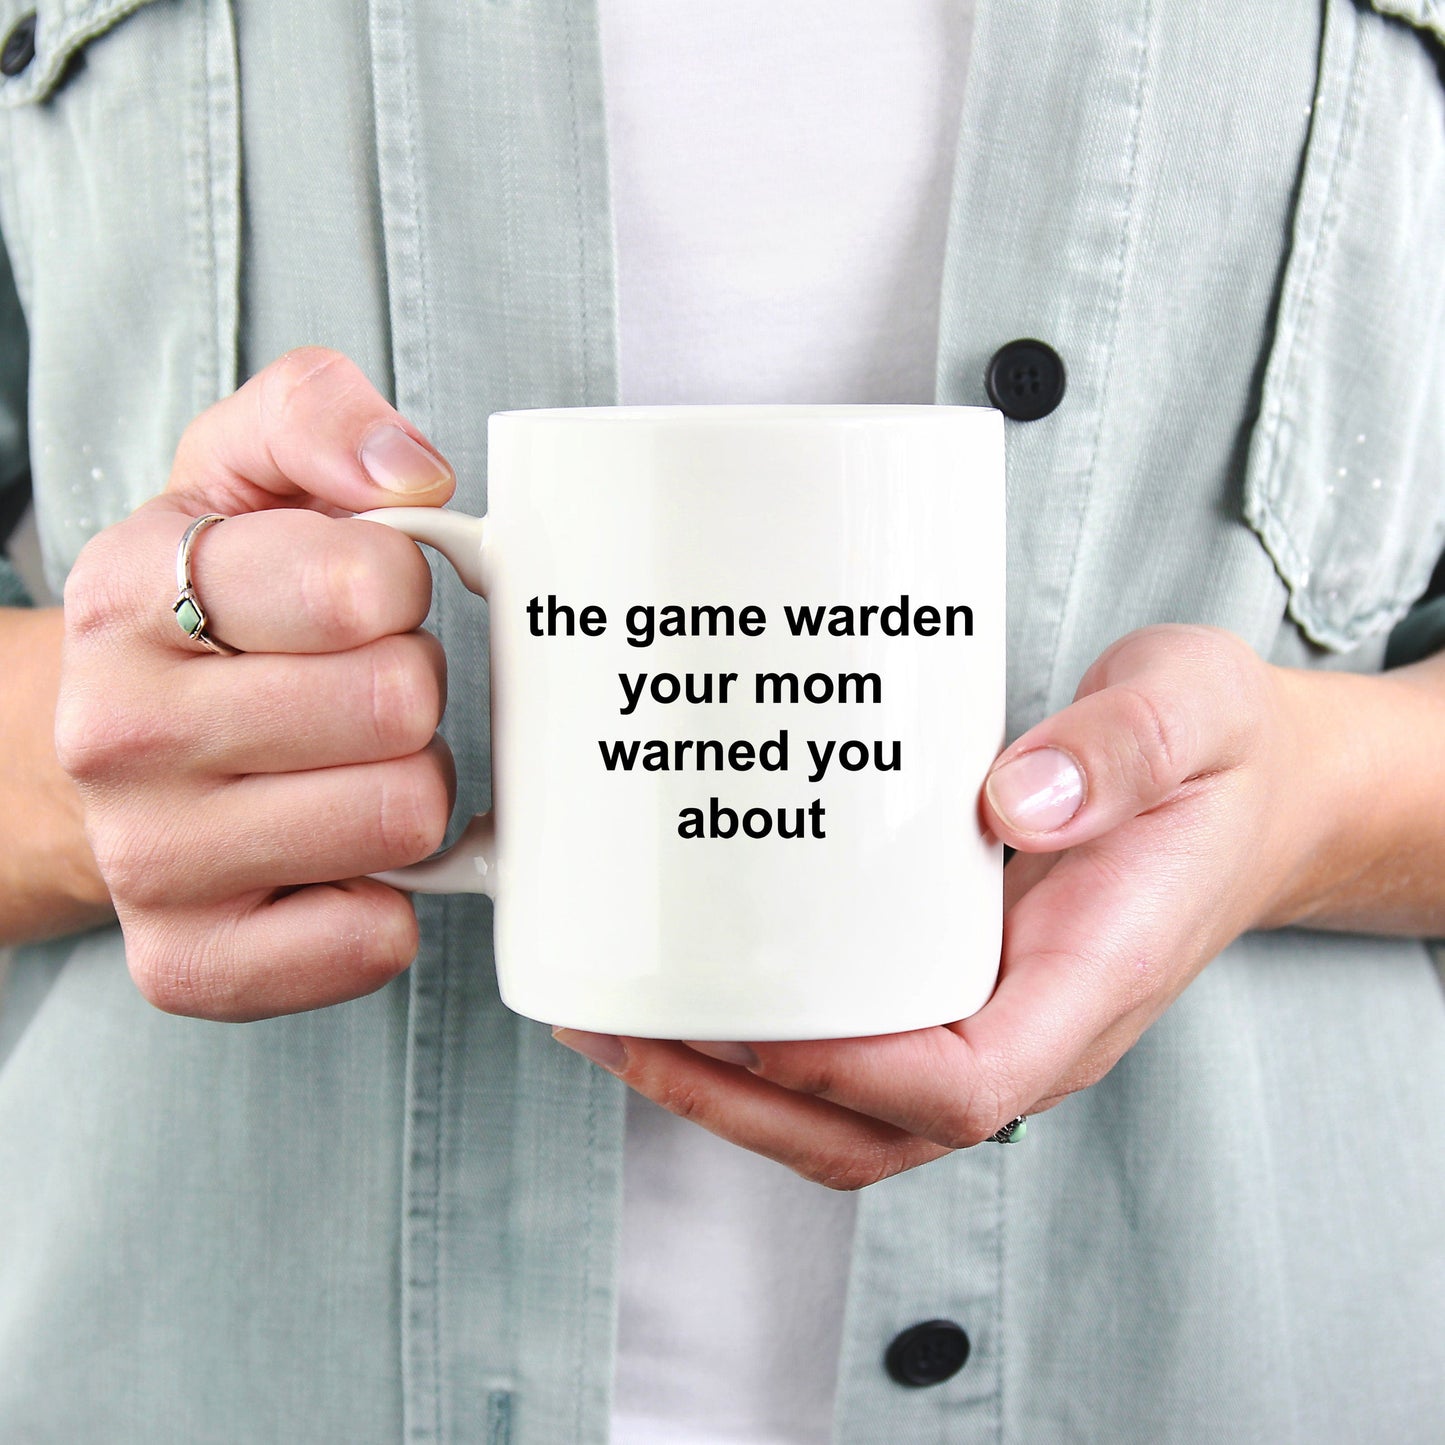 Game Warden Ceramic Coffee Mug - Your Mom Warned You About